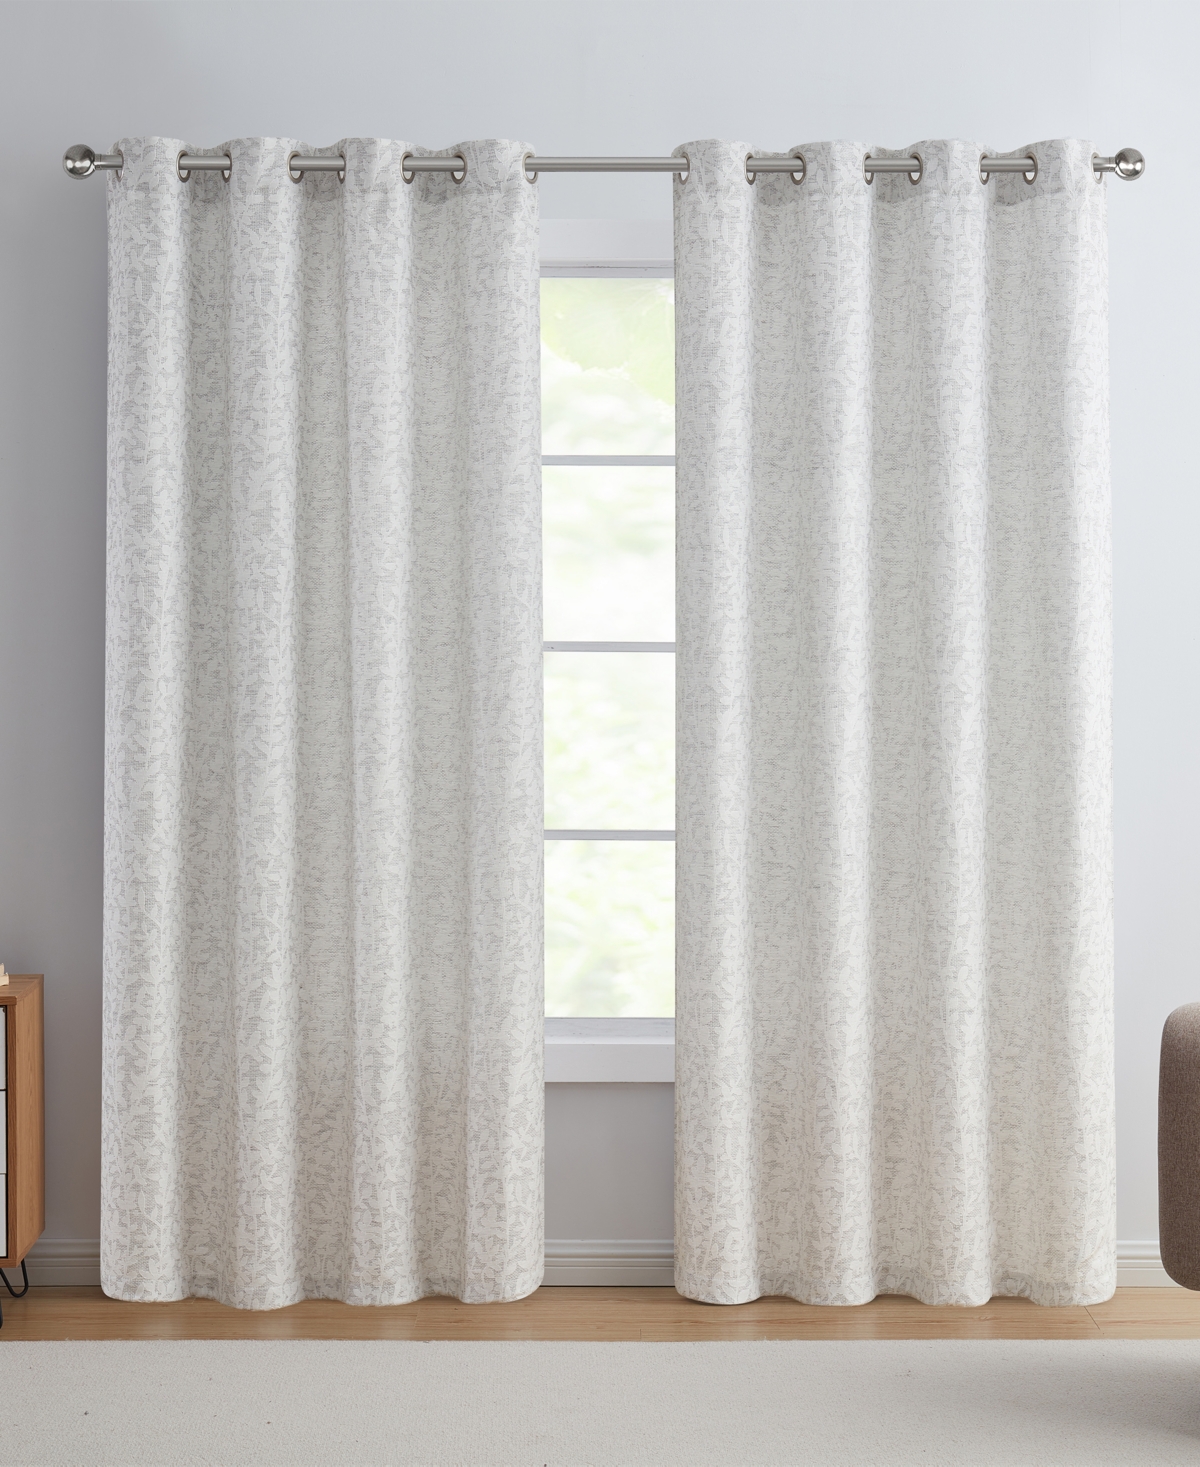 Vcny Home Leah Textured Leaf Grommet Curtain Panel, 54" X 84" In Gray